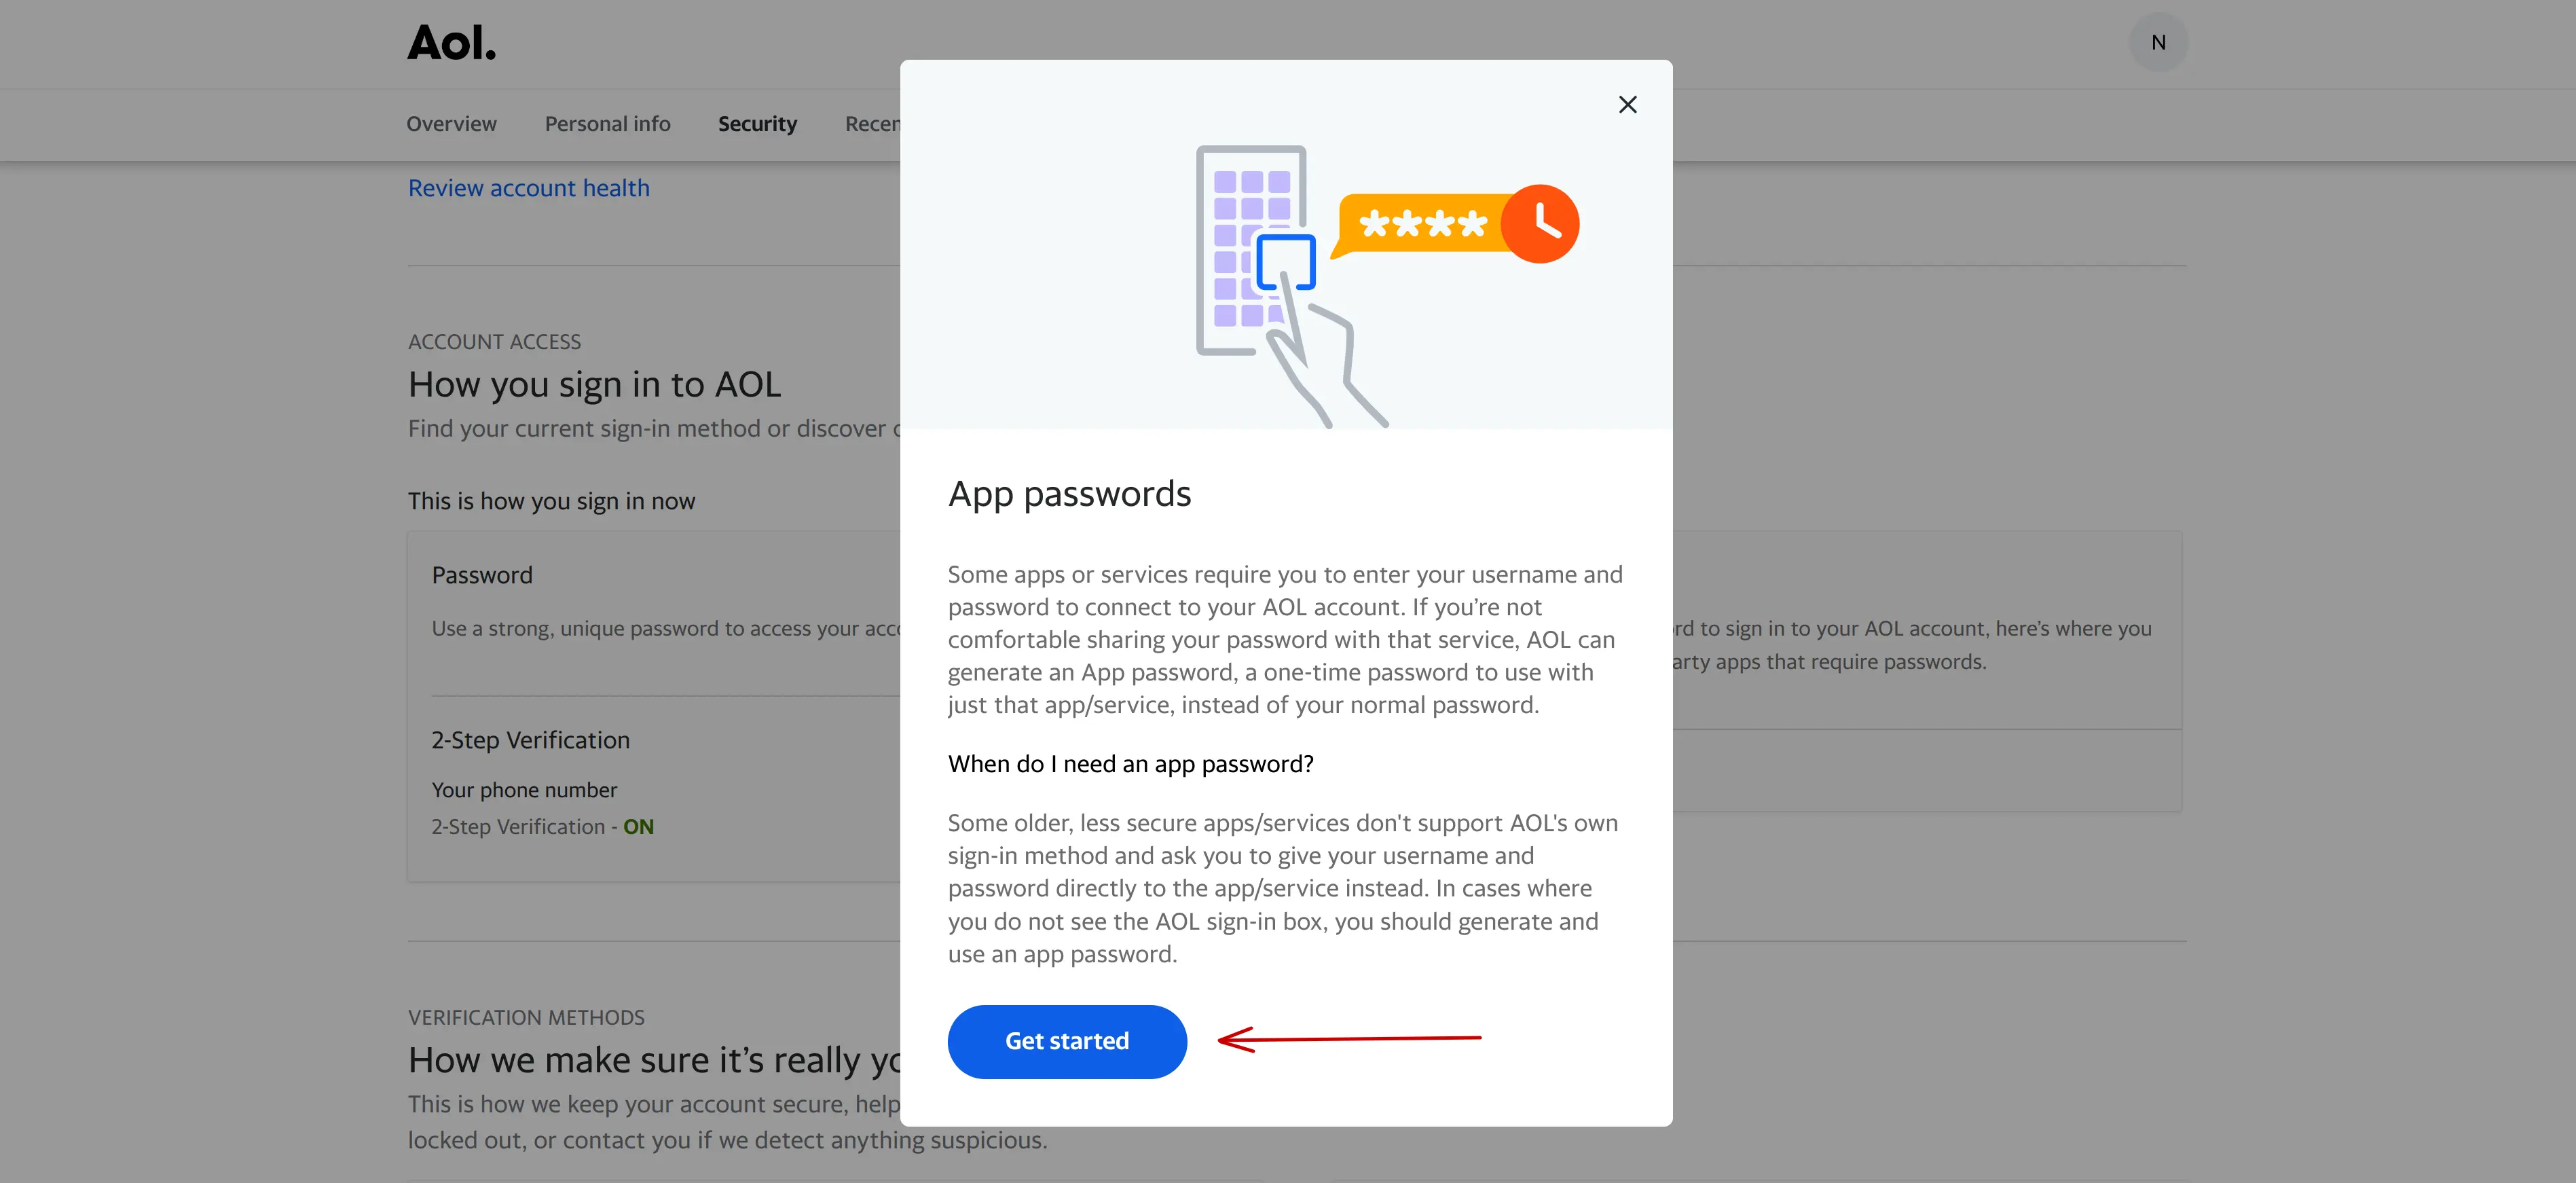 aol-get-started-with-app-password-gnerate